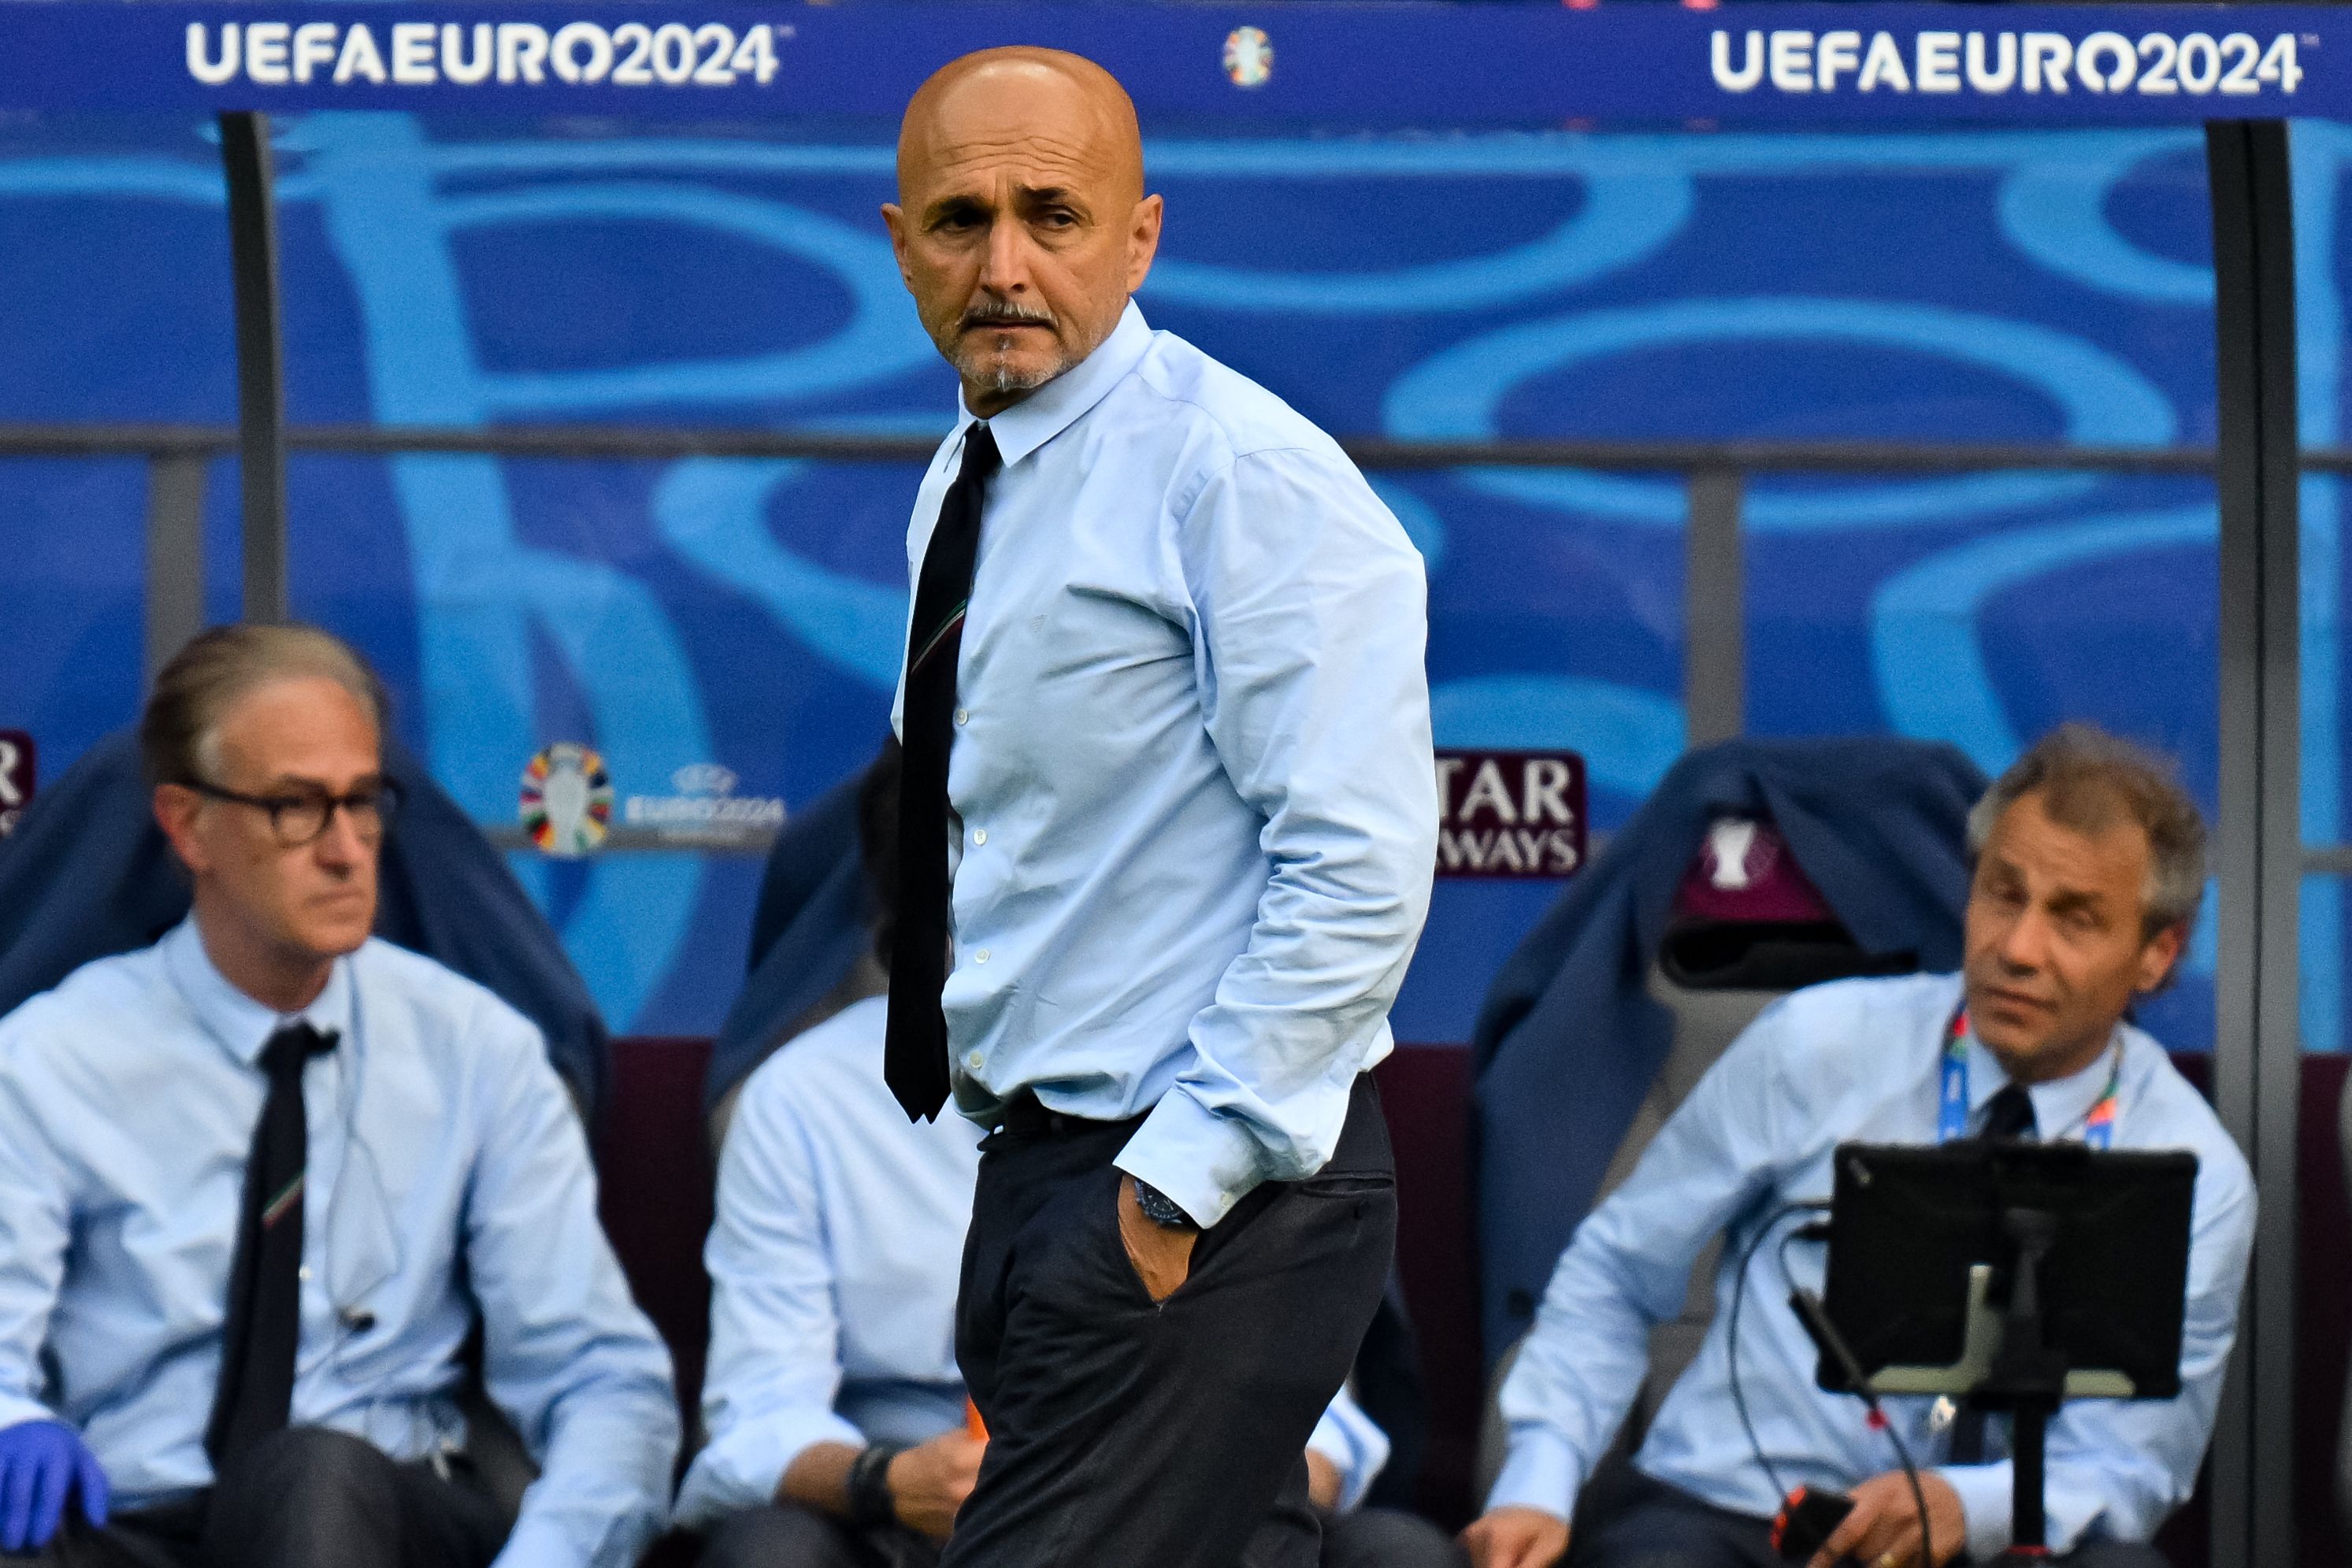 Italy's head coach Luciano Spalletti looks on during the UEFA Euro 2024 round of 16 football match between Switzerland and Italy at the Olympiastadion Berlin in Berlin on June 29, 2024. (Photo by Fabrice COFFRINI / AFP)